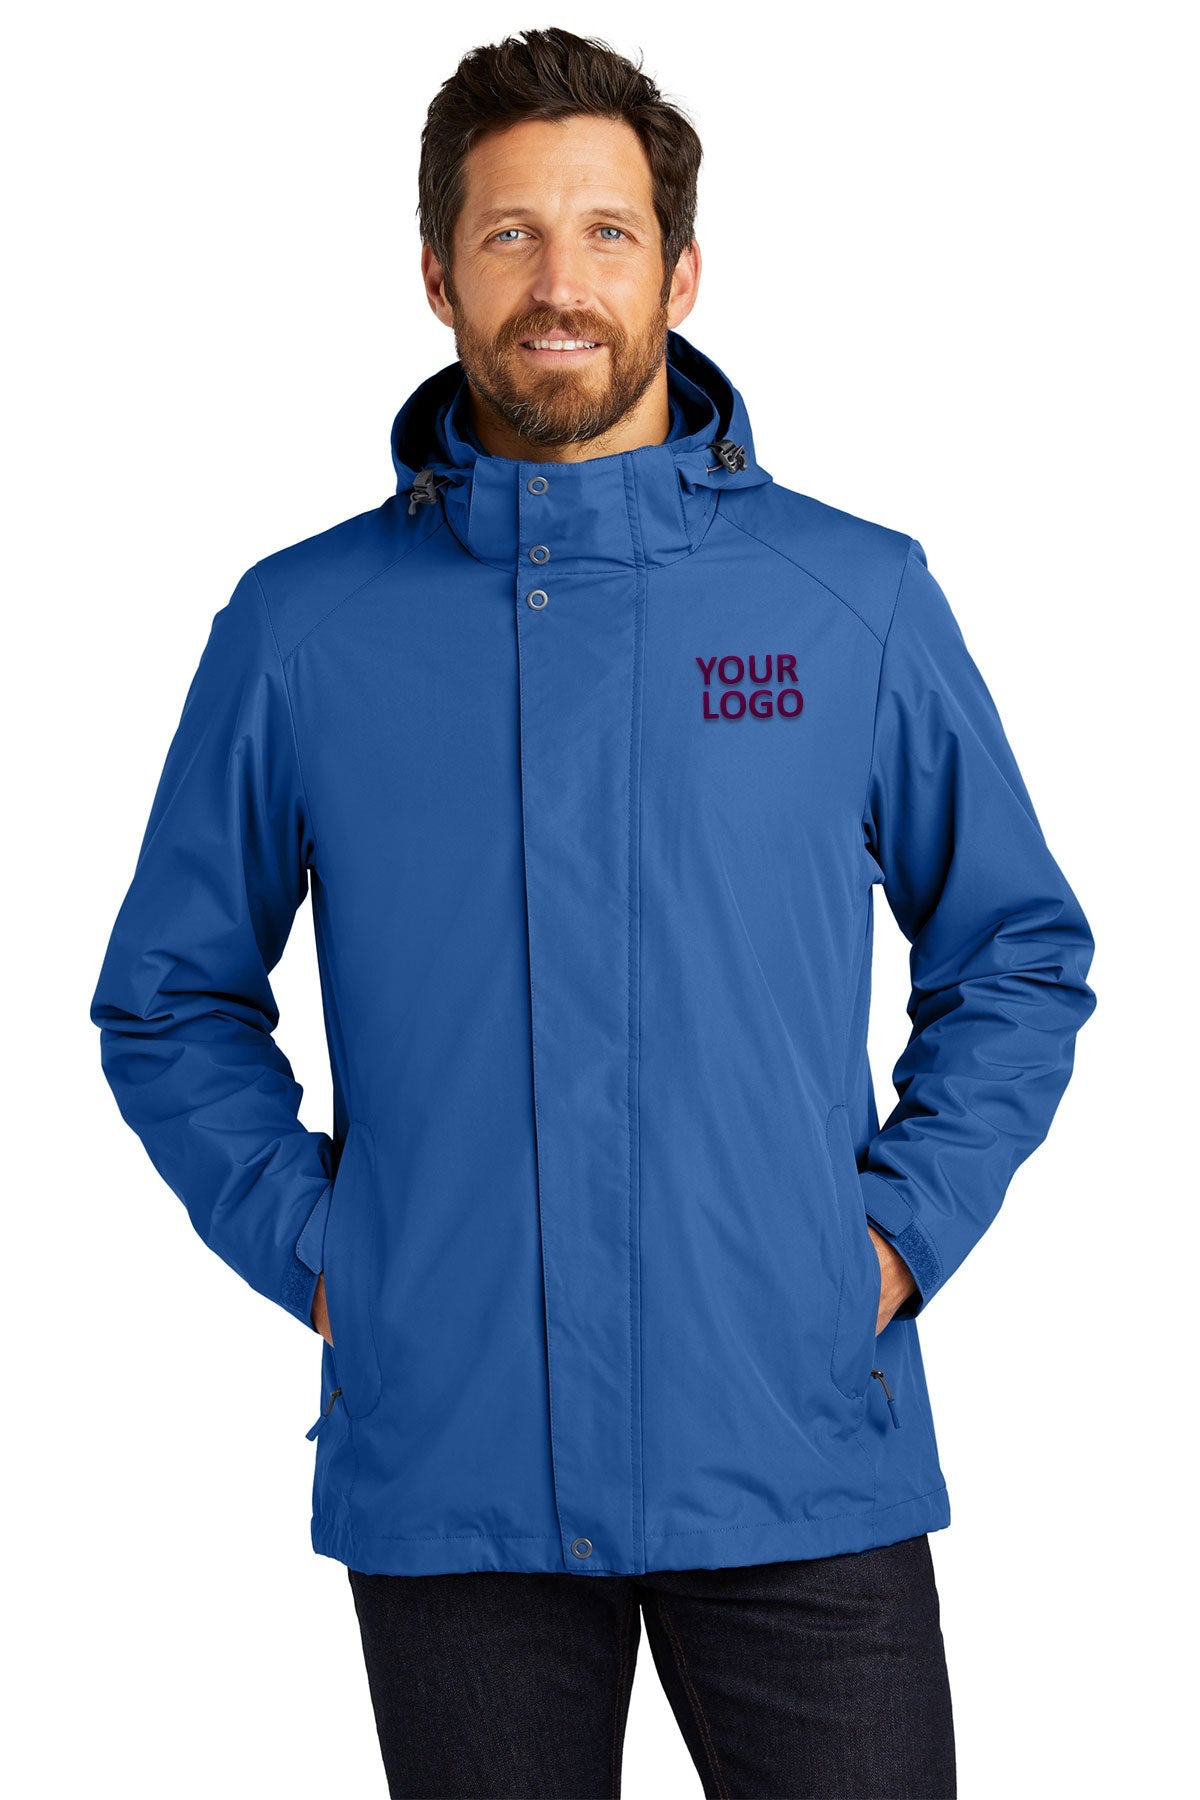 Port Authority All-Weather 3-in-1 Customized Jackets, True Blue